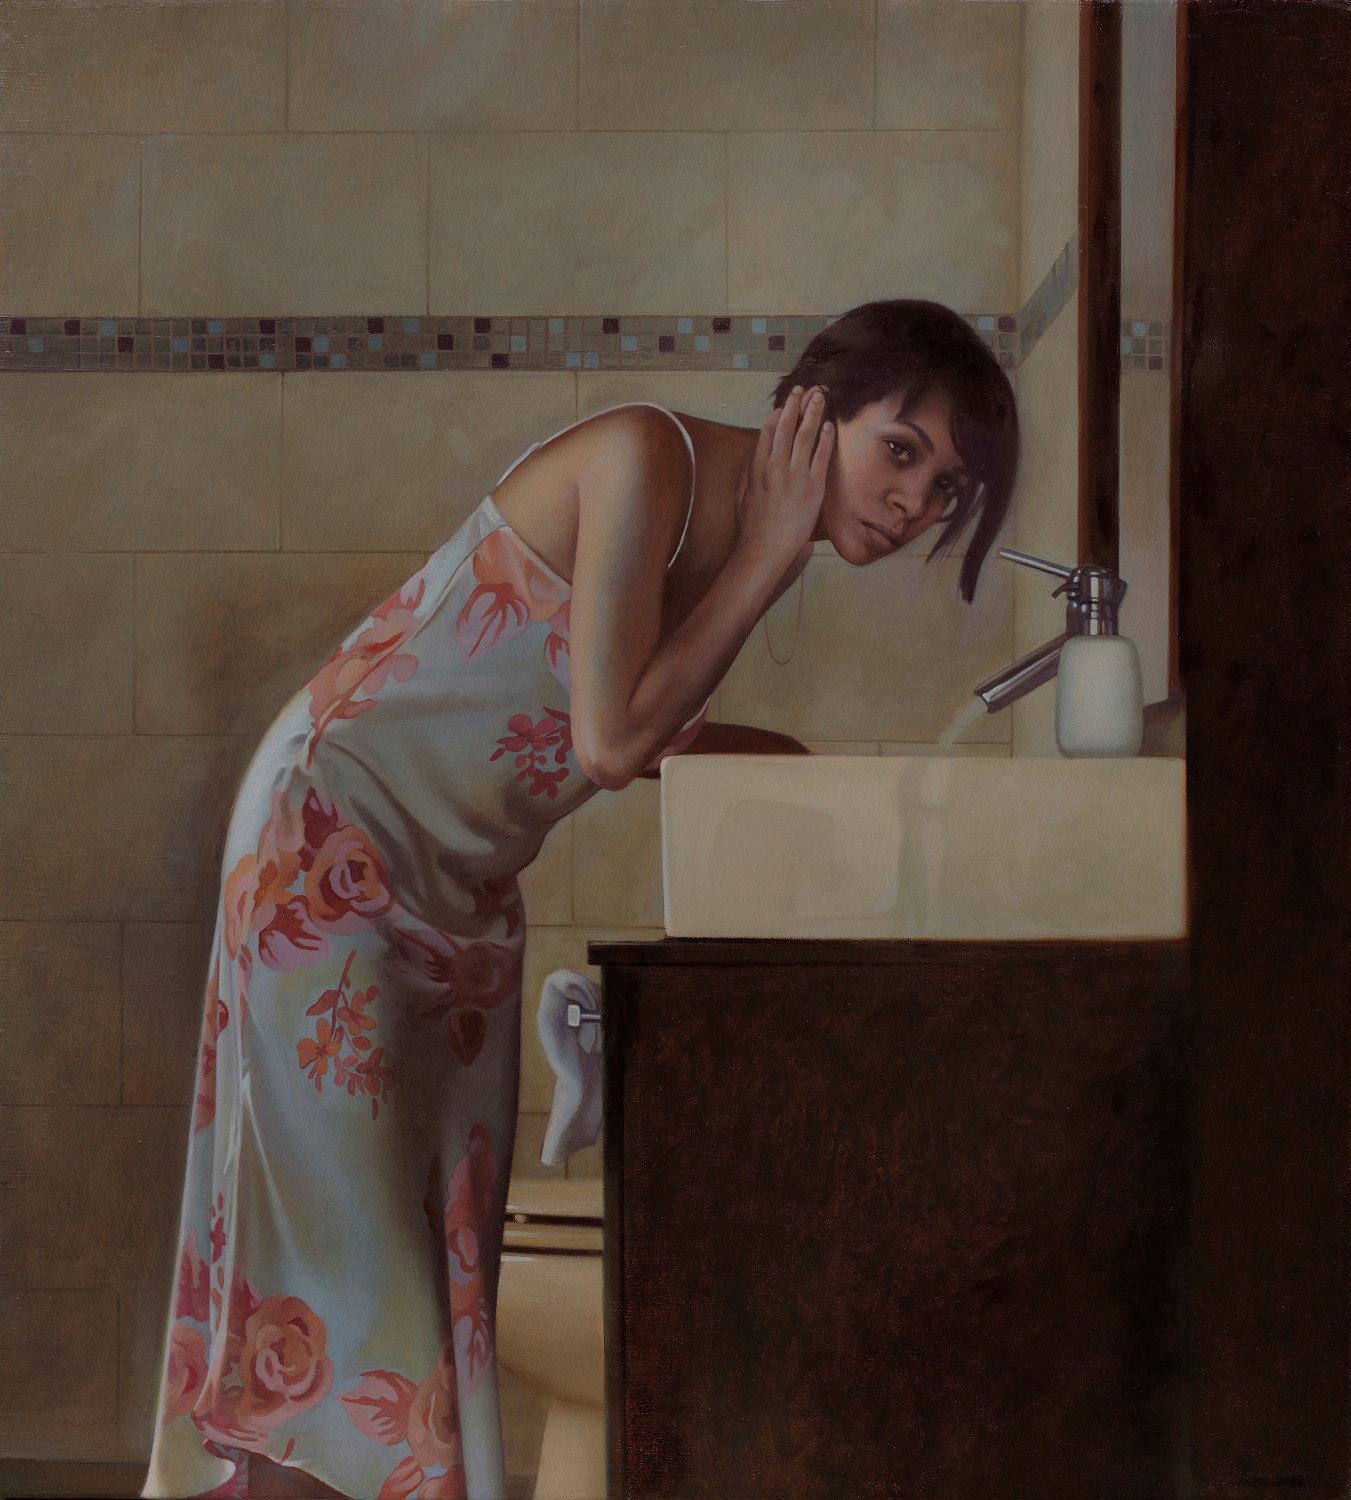   Pilar , 2015, Oil on linen, 22 x 20 inches, Private collection 